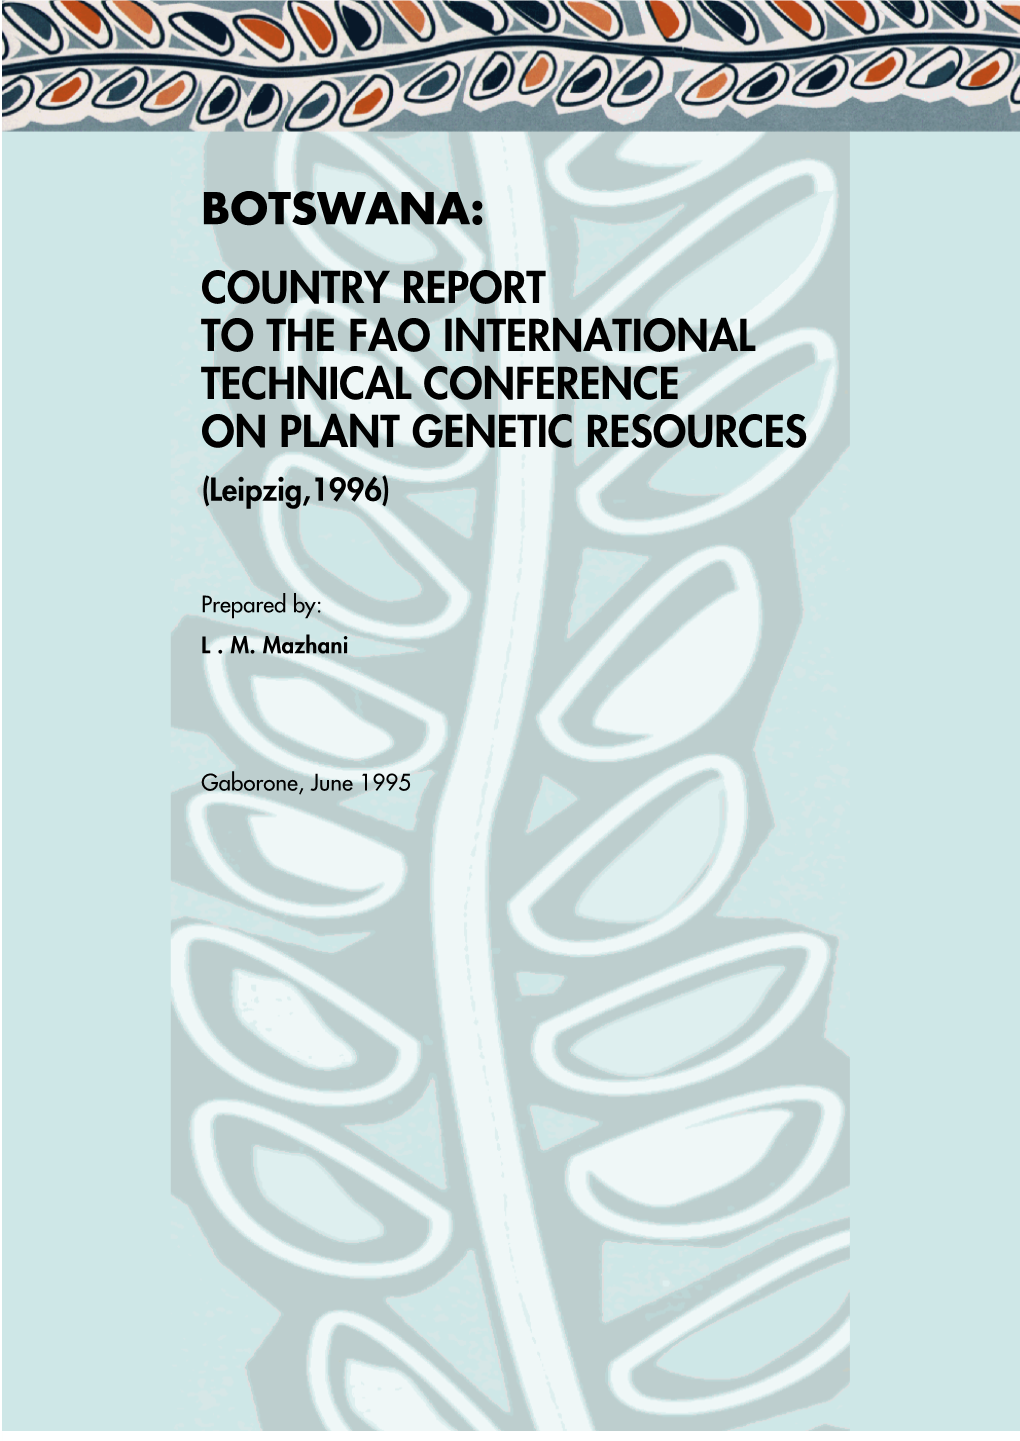 BOTSWANA: COUNTRY REPORT to the FAO INTERNATIONAL TECHNICAL CONFERENCE on PLANT GENETIC RESOURCES (Leipzig,1996)